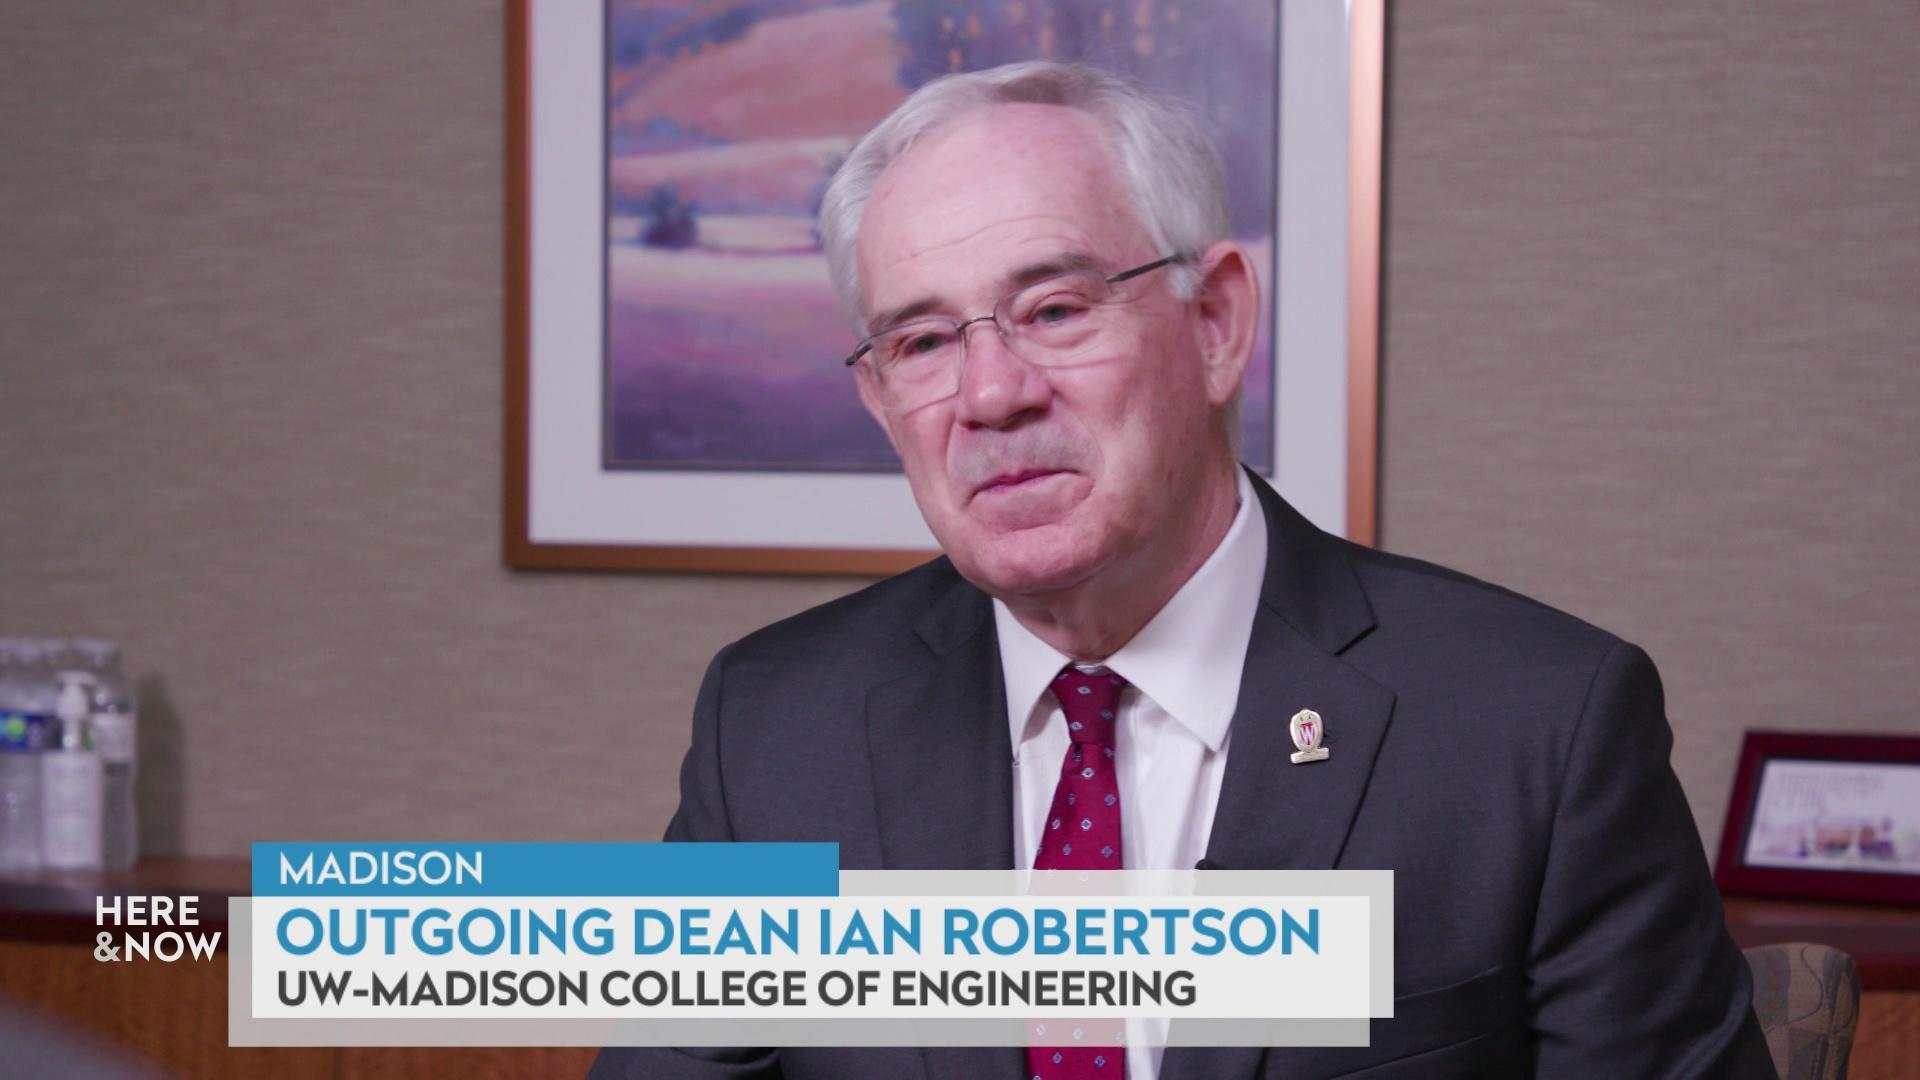 A still image shows Ian Robertson seated in front of framed art on a wall, with a graphic at bottom reading 'Madison,' 'Outgoing Dean Ian Robertson' and 'UW-Madison College of Engineering.'